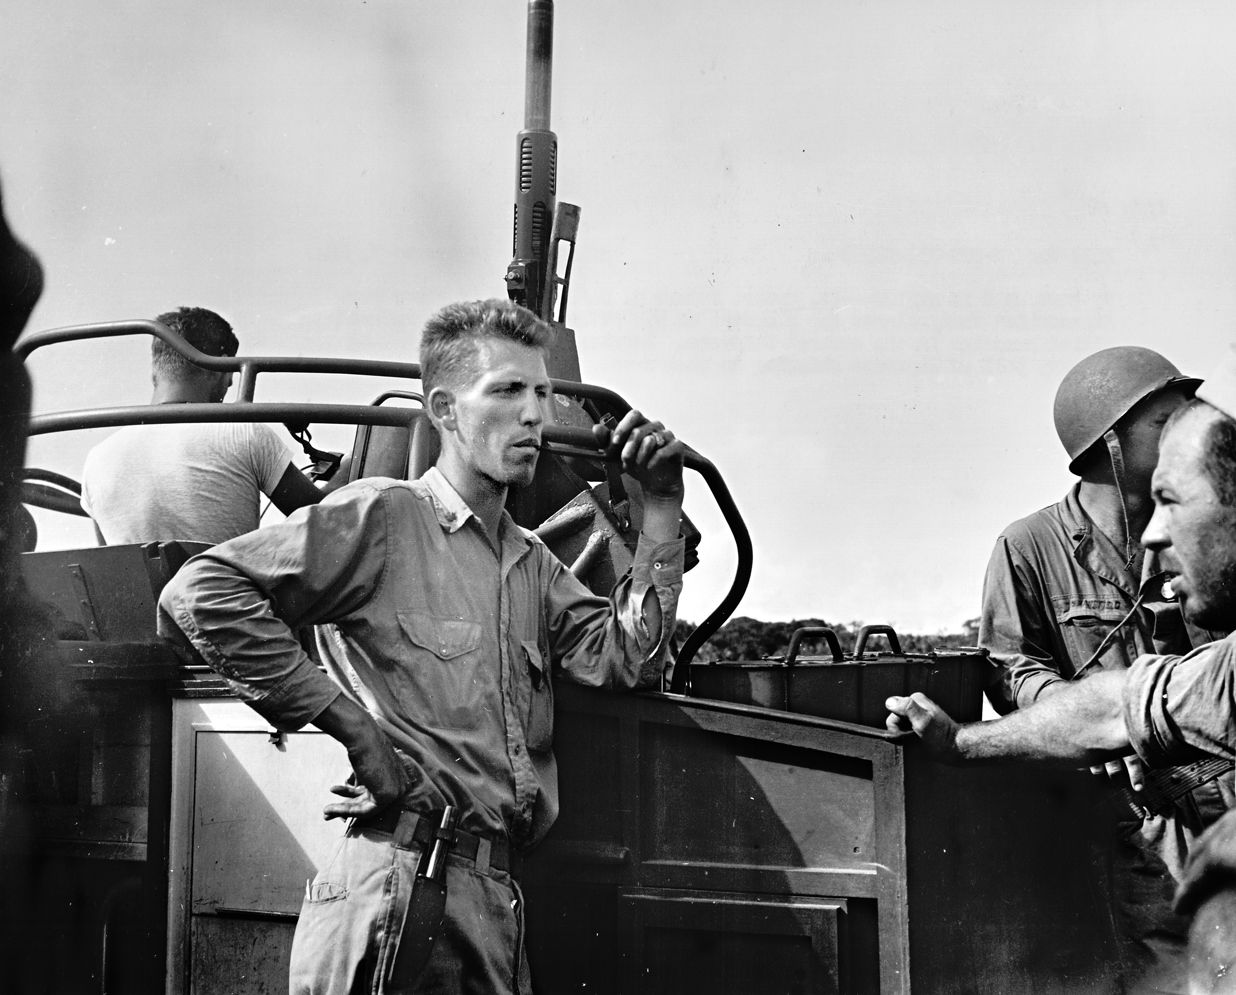 Lieutenant Commander Robert Kelly is shown in a 1943 photo taken just after his promotion. While a lieutenant, Kelly commanded PT-41, which accompanied Lieutenant John Bulkeley’s PT-34 during the daring rescue and transport of General Douglas MacArthur and his family from the embattled Philippines.